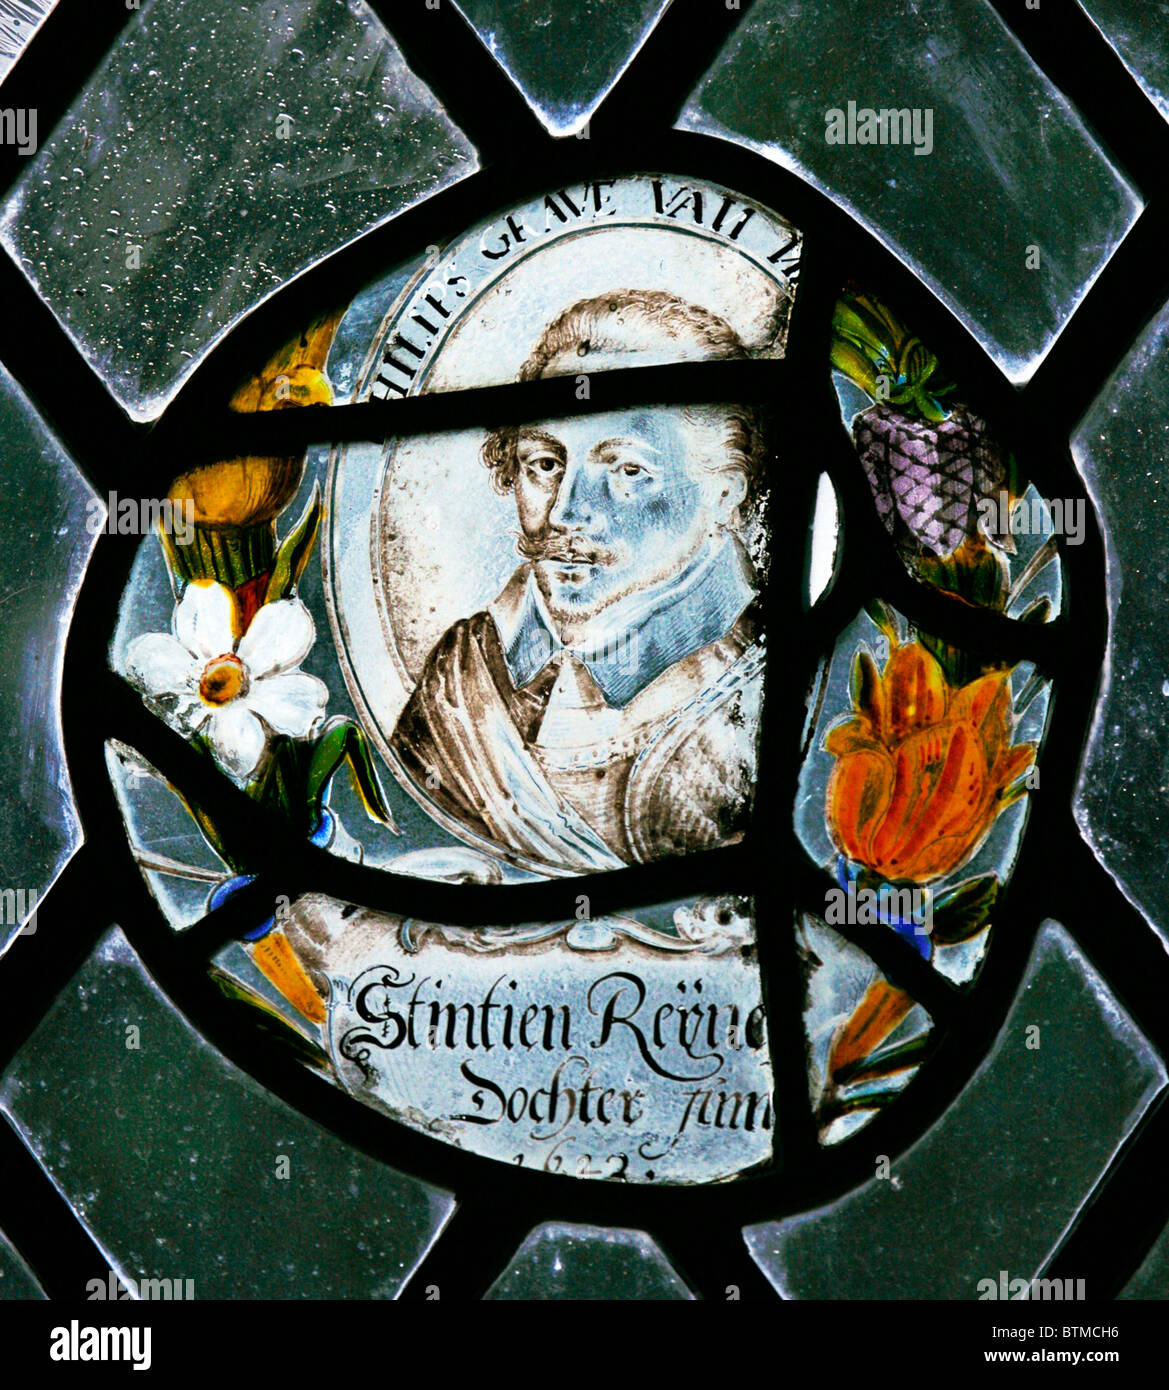 A Stained glass window depicting Philip, Count of Nassau Siegen, 1566 - 1595, Flemish School, circa 17th century Stock Photo